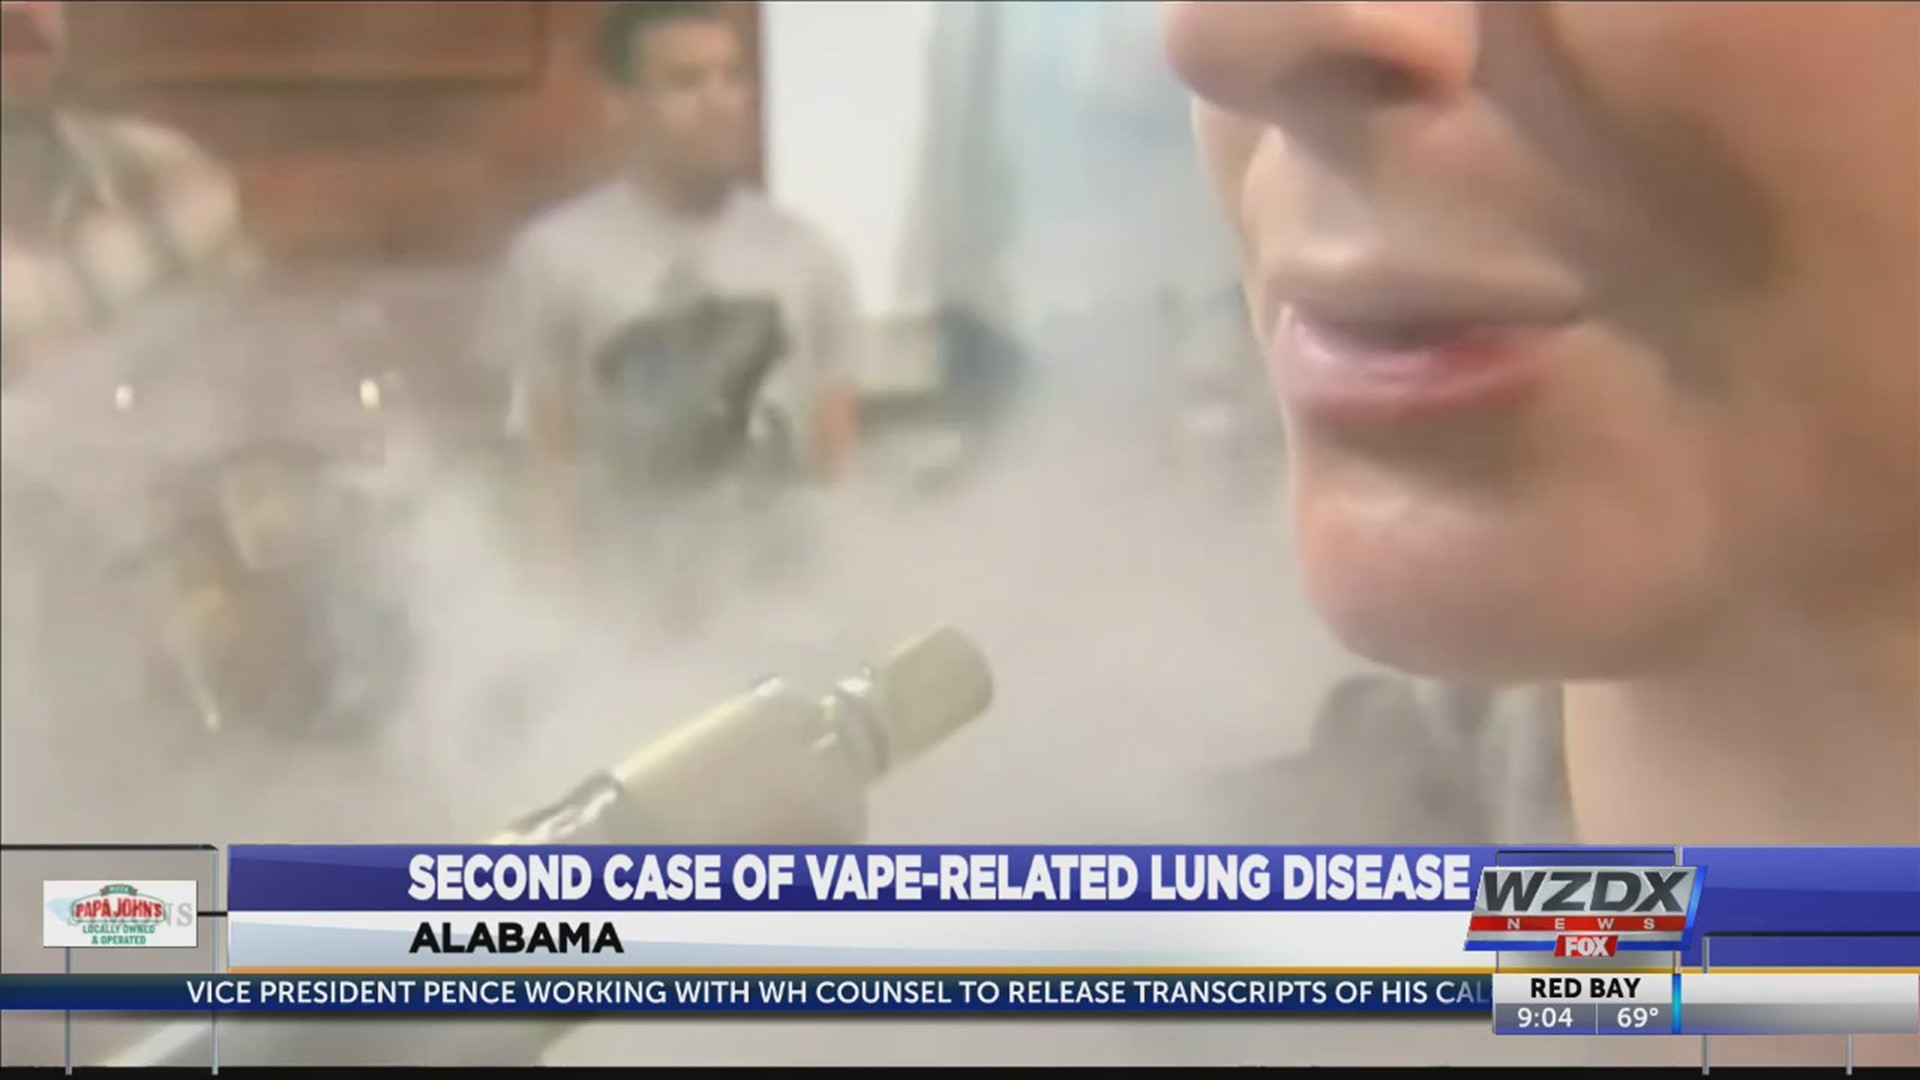 The Alabama Department of Public Health has received 24 reports of lung disease associated with vaping -- that's up from 19 a week ago.